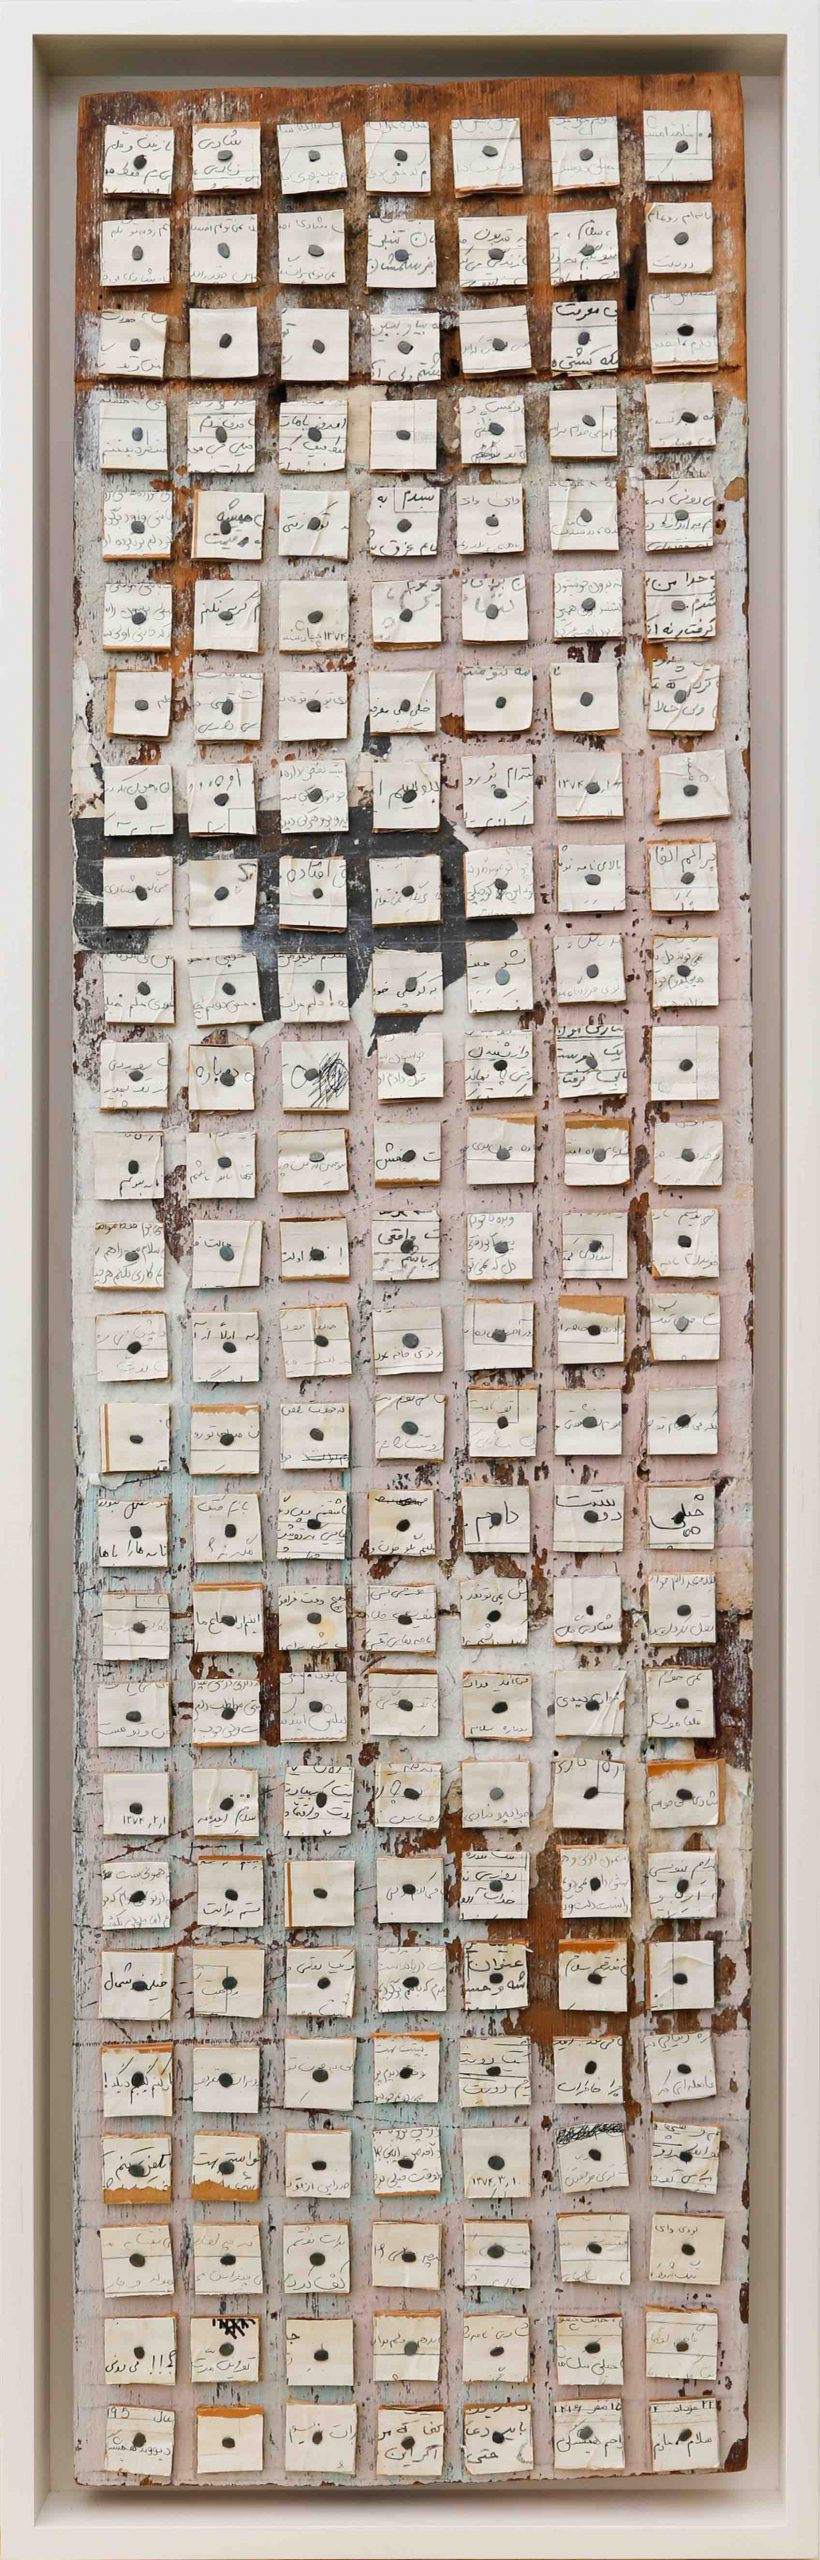 Letters 24, 2020, Photocopied letters pasted on wood, 37 x 11 in
Courtesy ADVOCARTSY and the artist.